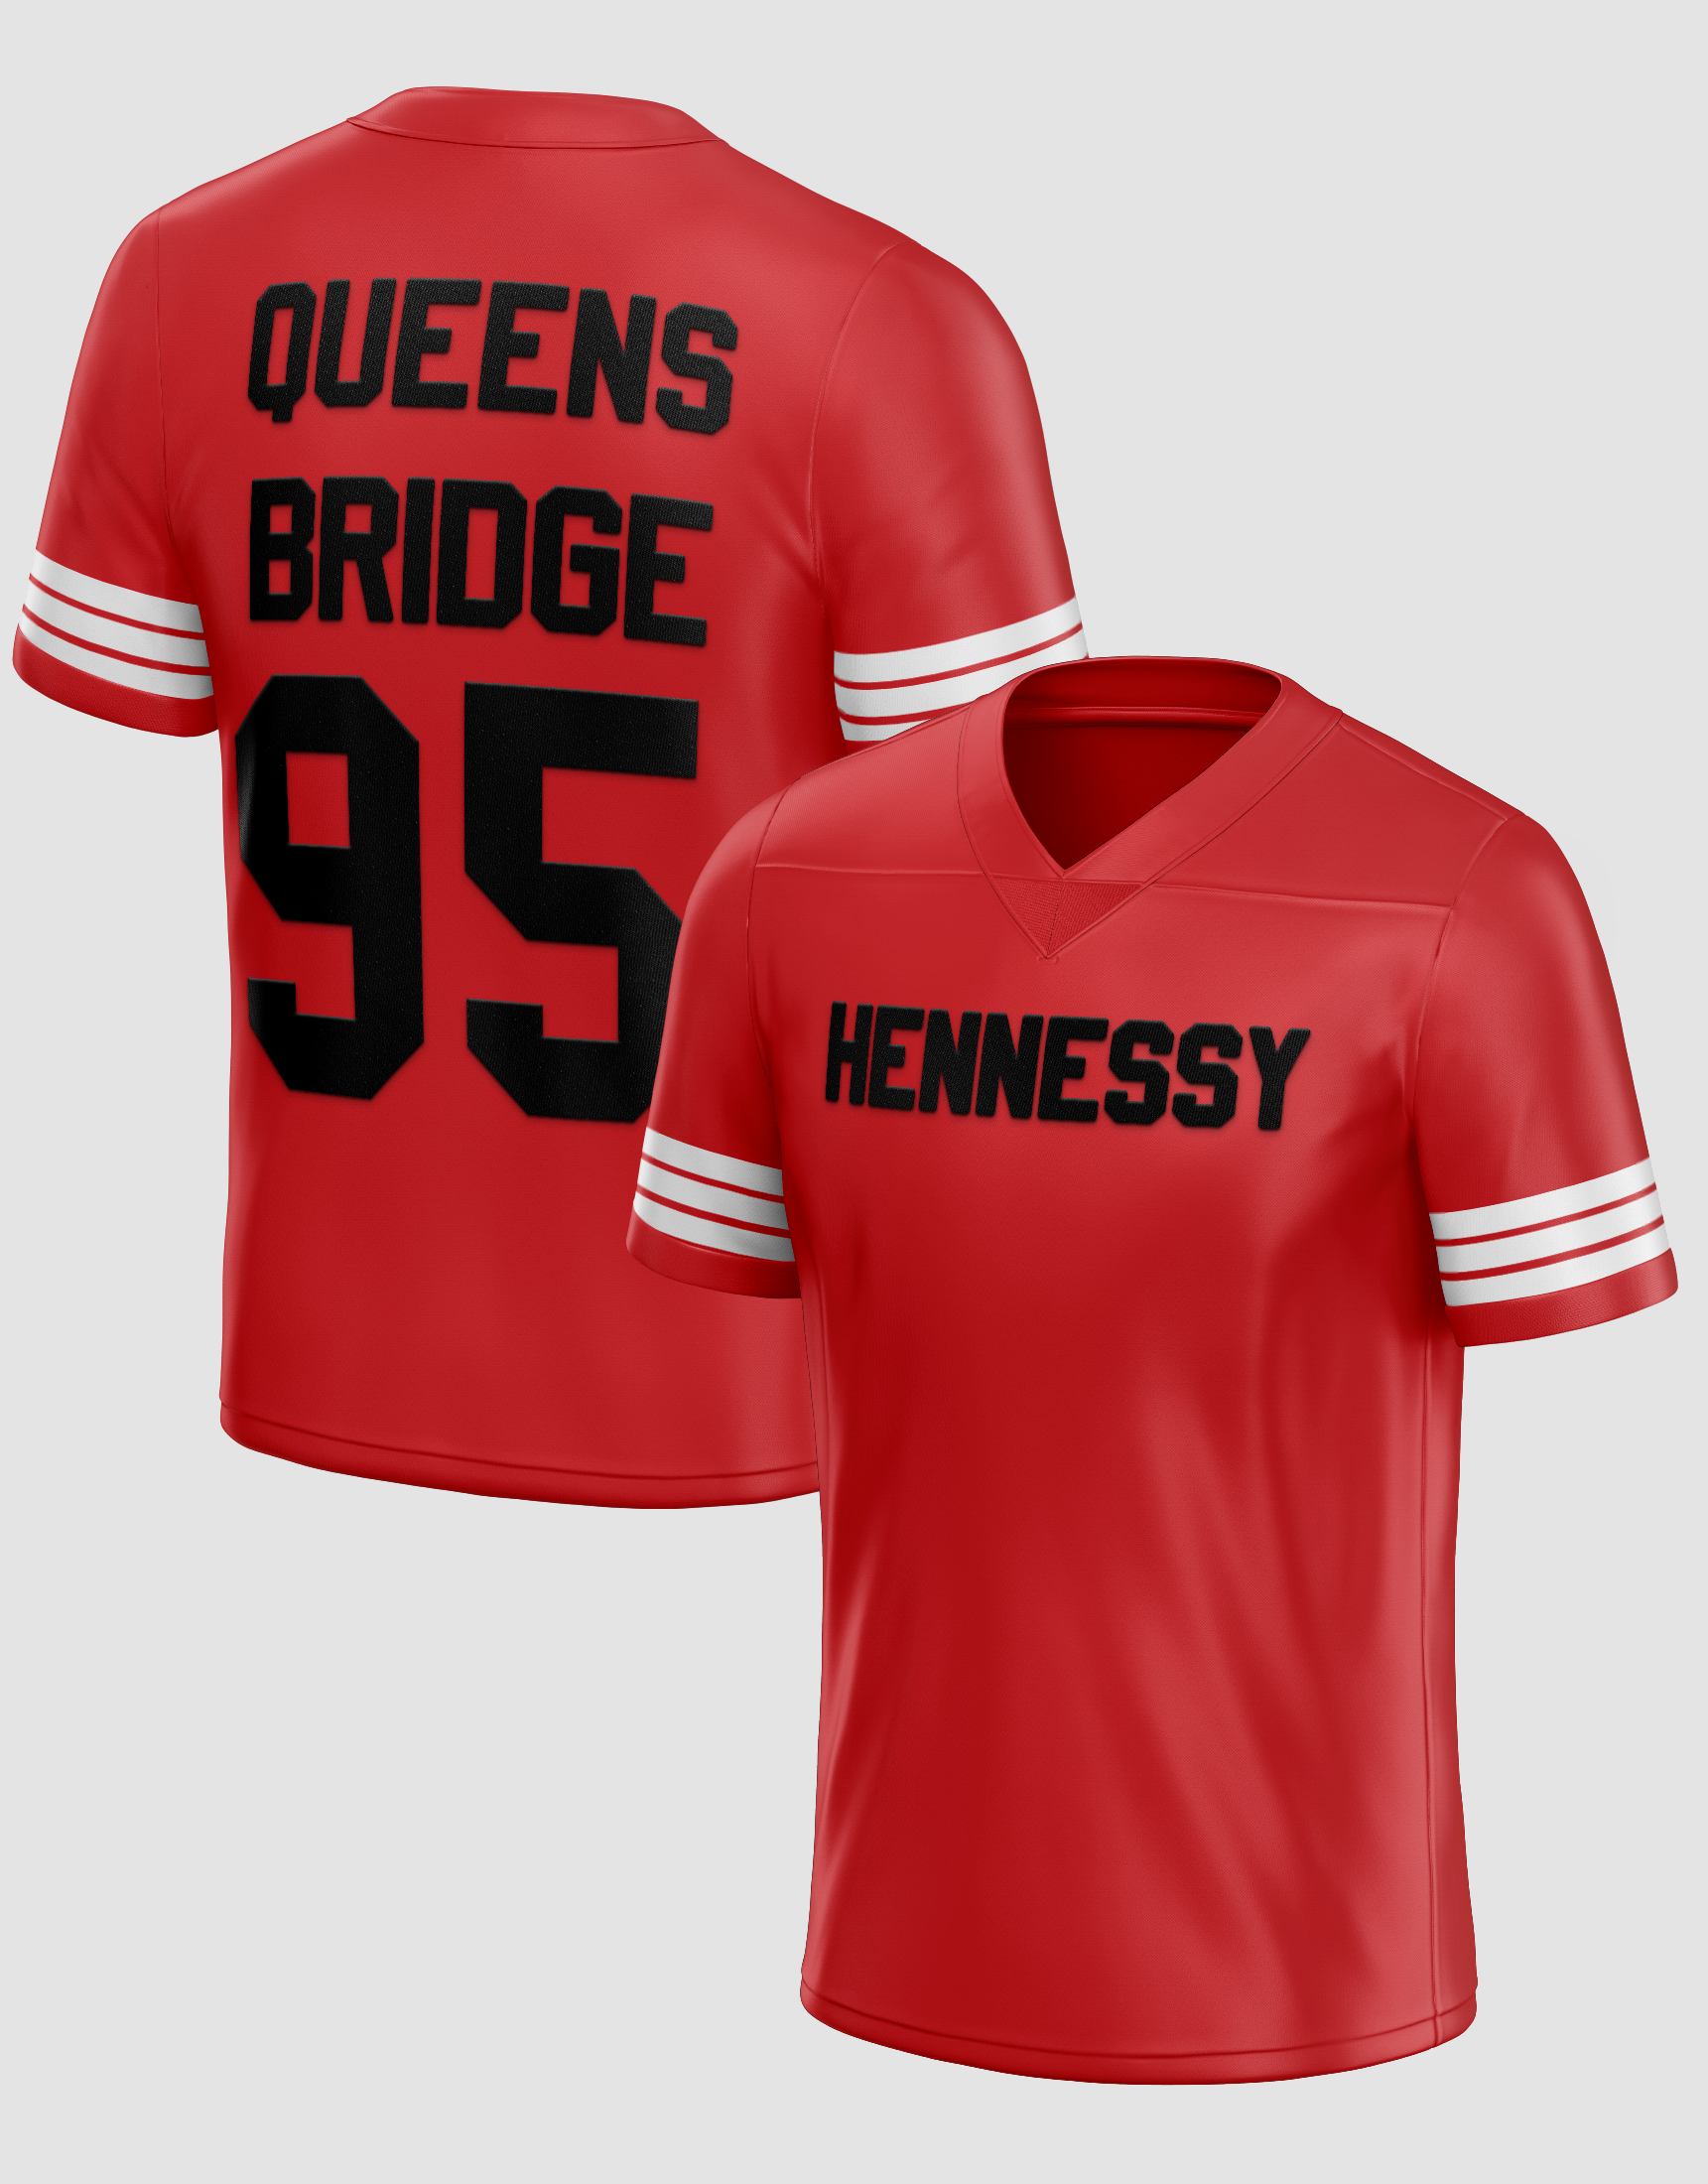 Prodigy Hennessy #95 Queens Football Jersey – Official | Basketball, Football Jerseys & and more